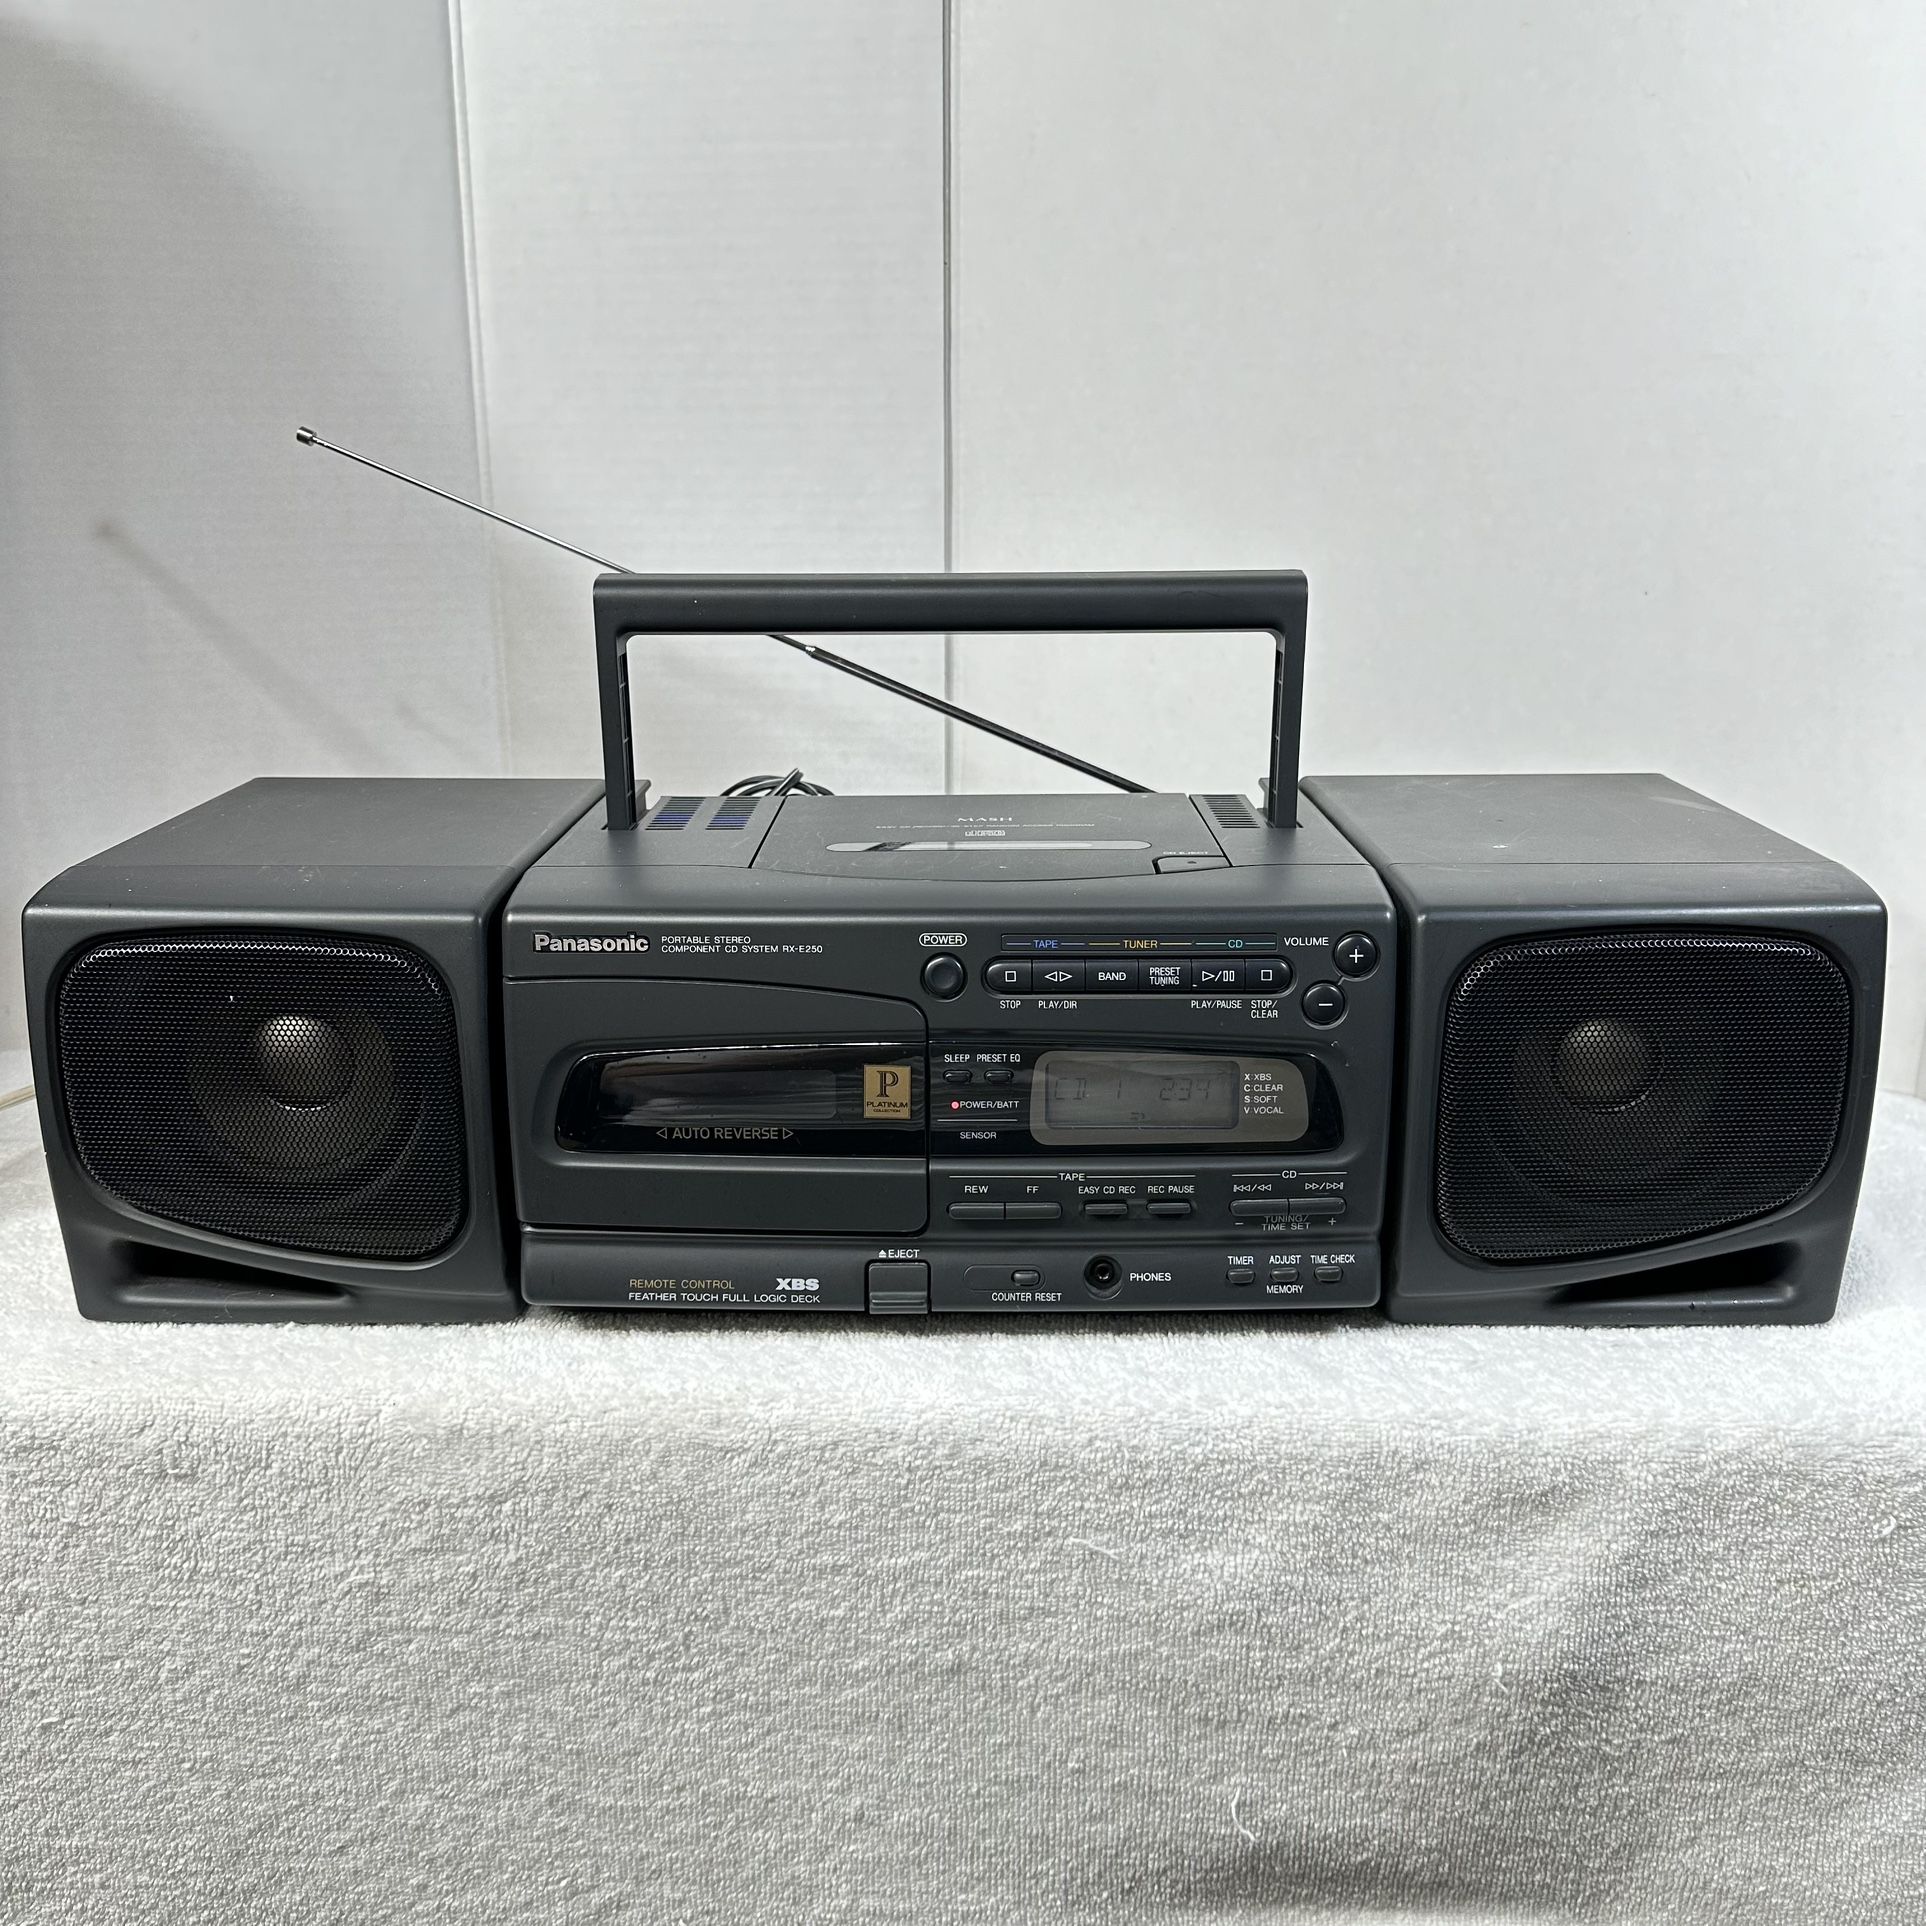 Panasonic Portable Stereo CD/AM/FM Boombox with detachable speakers—plays well-AC/DC capable-Demo Available 